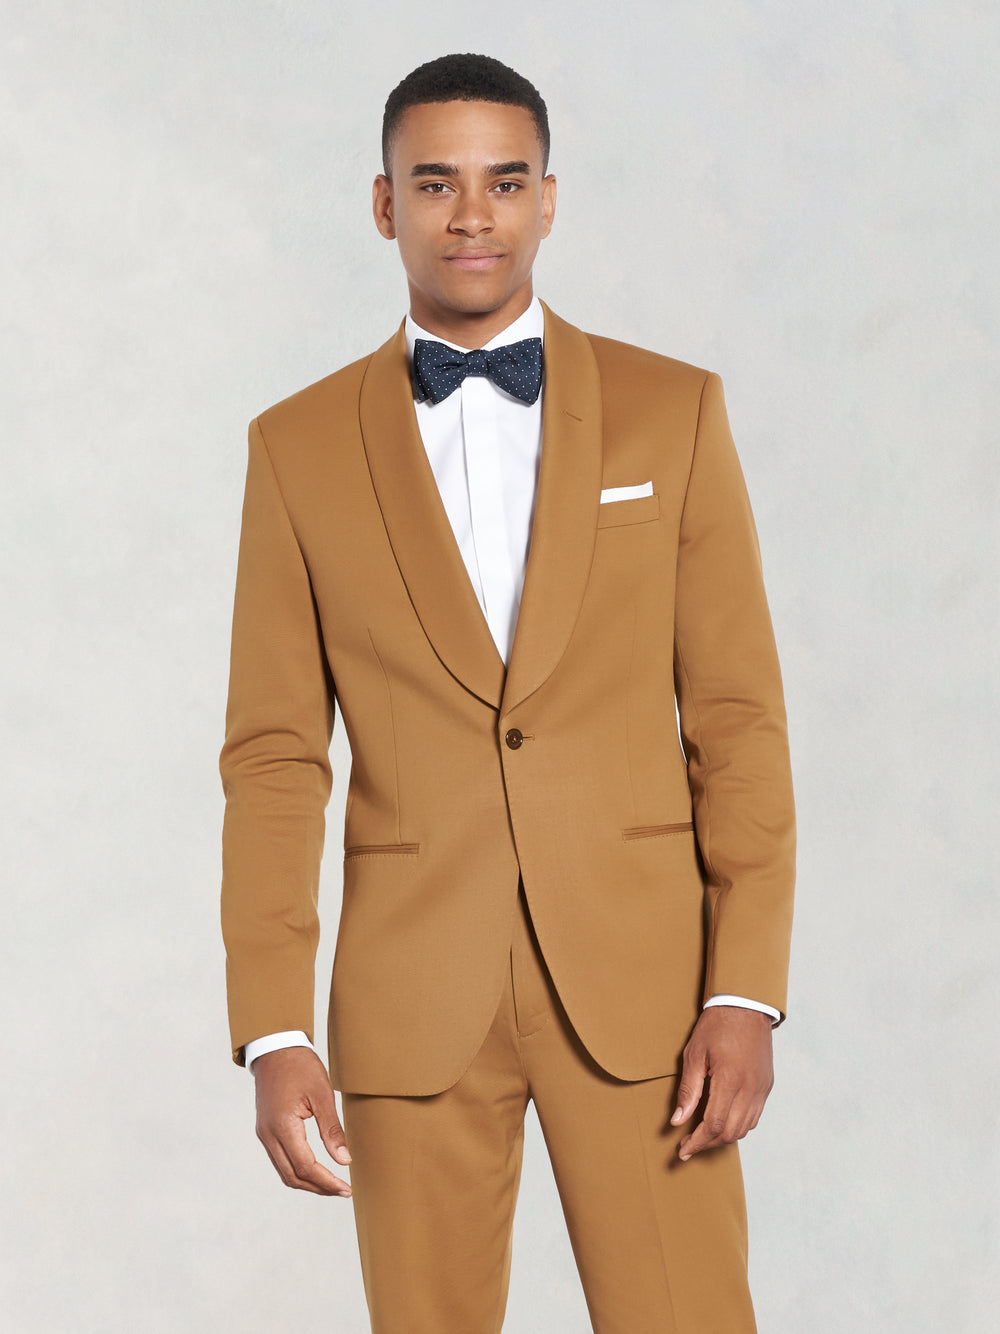 Browse Suits & Tuxedos